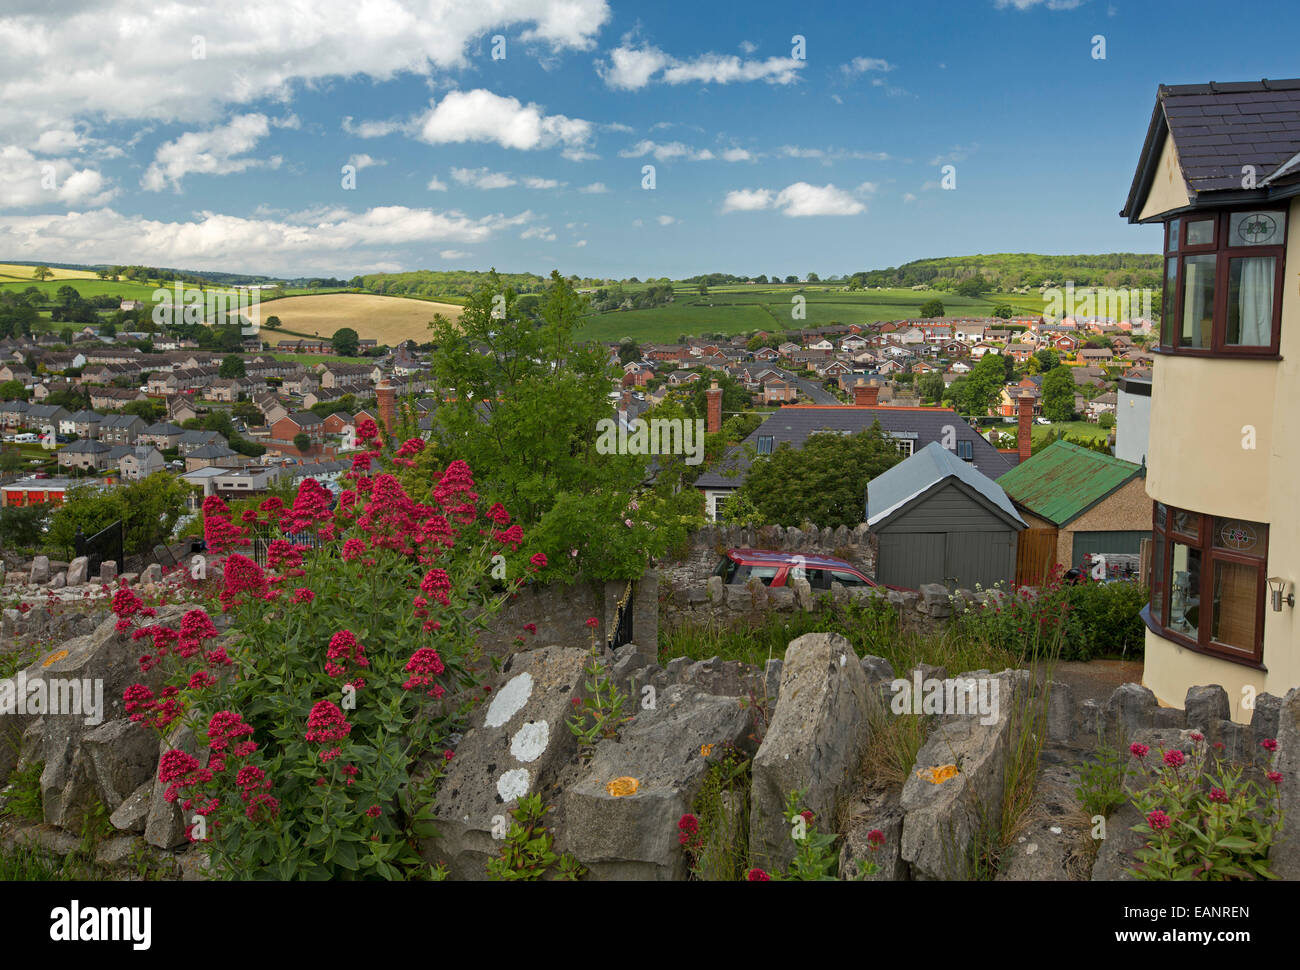 View, from hilltop, of historic Welsh town of Denbigh with wildflowers & emerald farmlands stretching to low hills & horizon Stock Photo